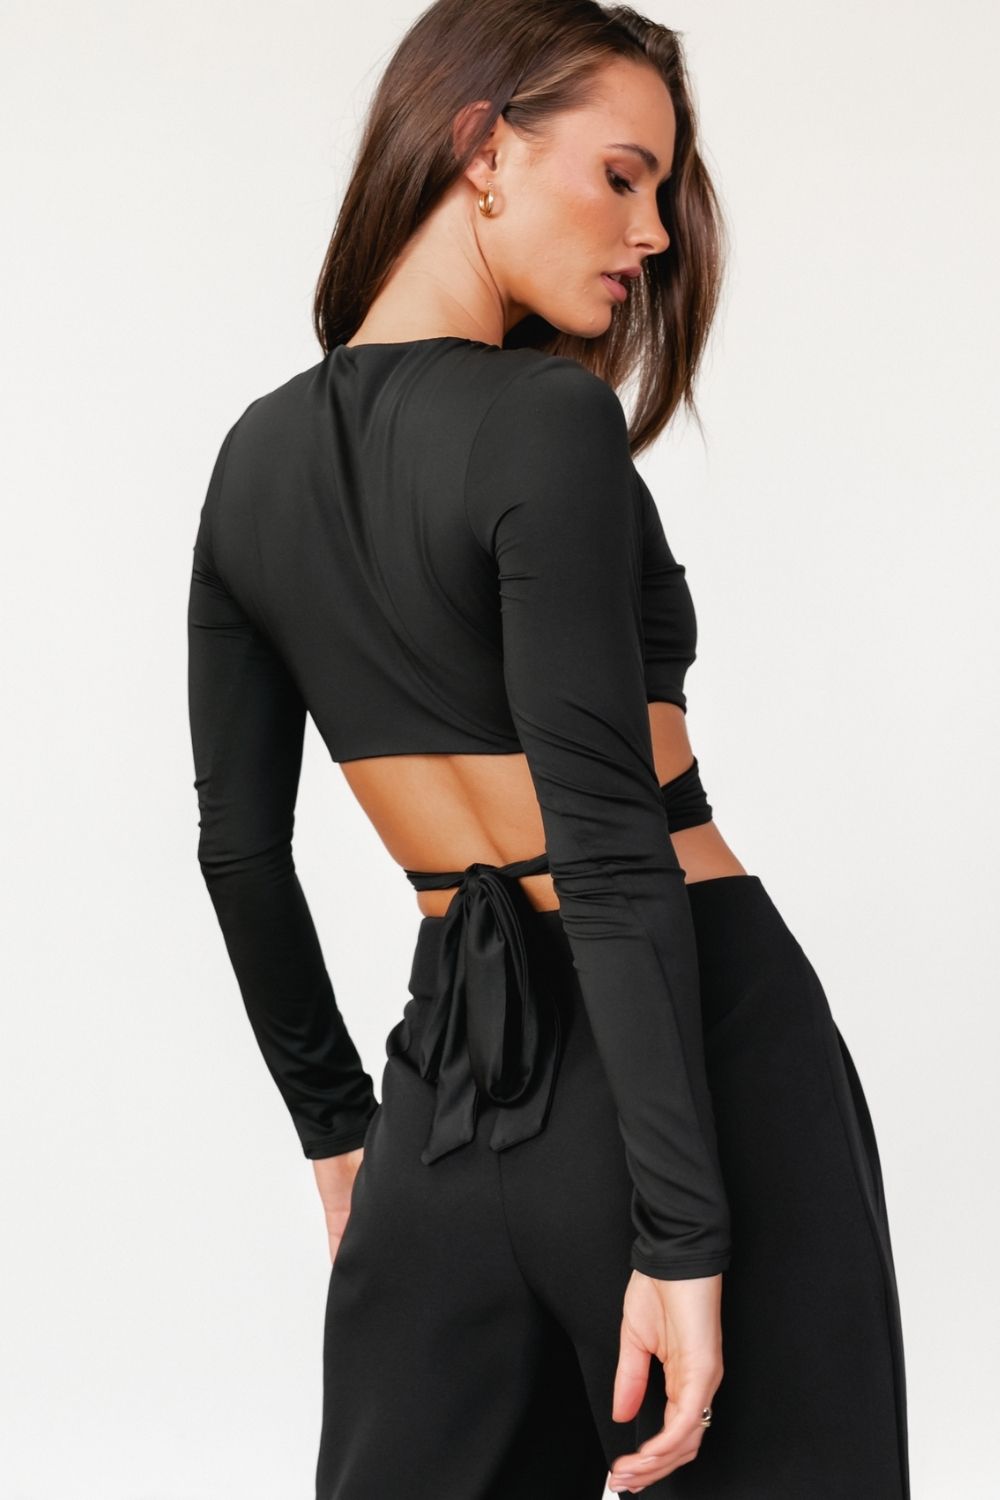 Styched Basic Cut Out Black Crop Top – Styched Fashion